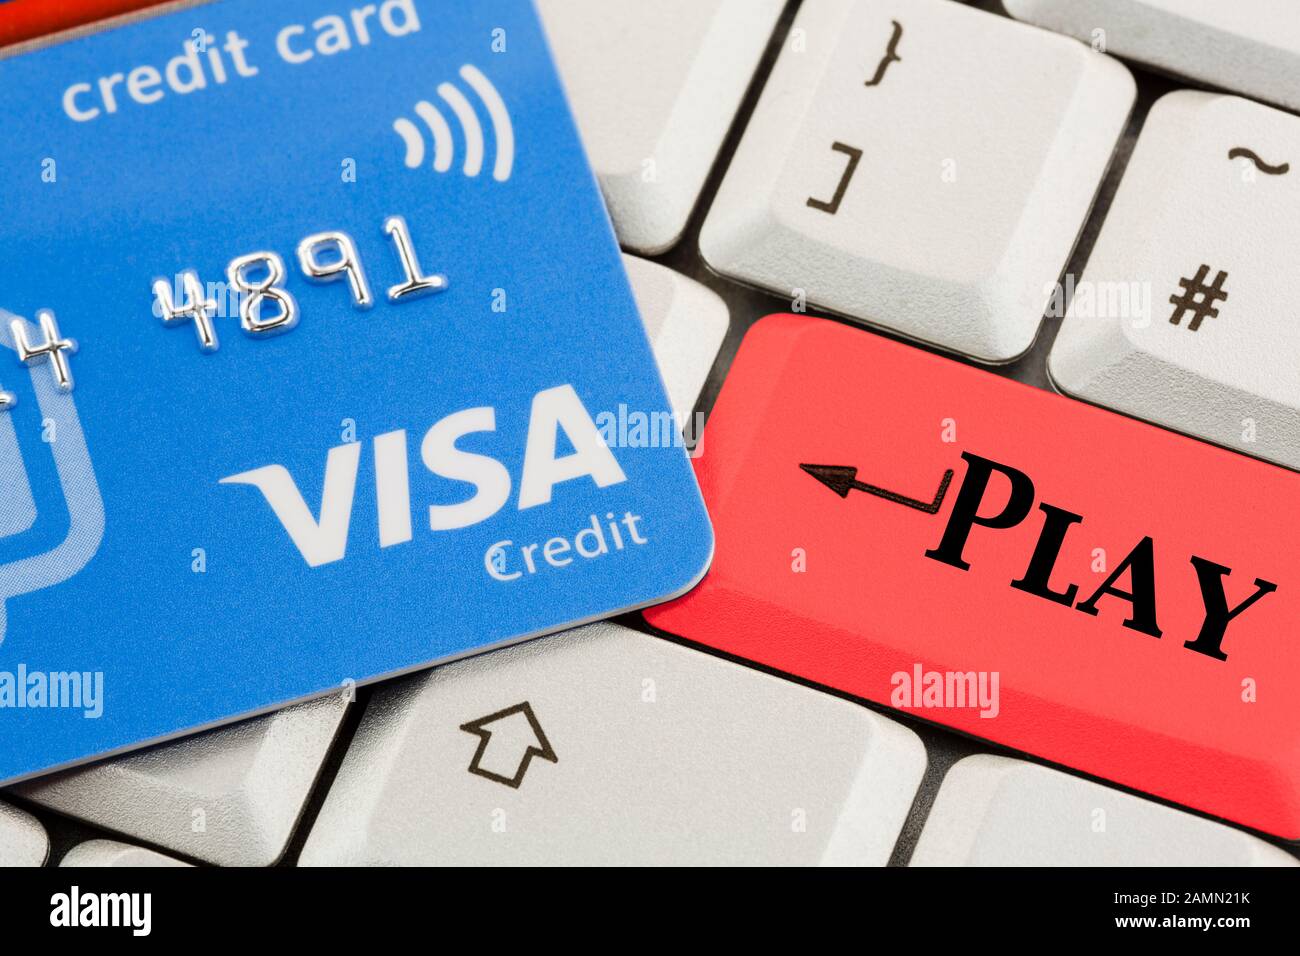 Visa credit card on a keyboard with word Play written on a red enter key to illustrate payment for online betting gambling concept. England UK Britain Stock Photo